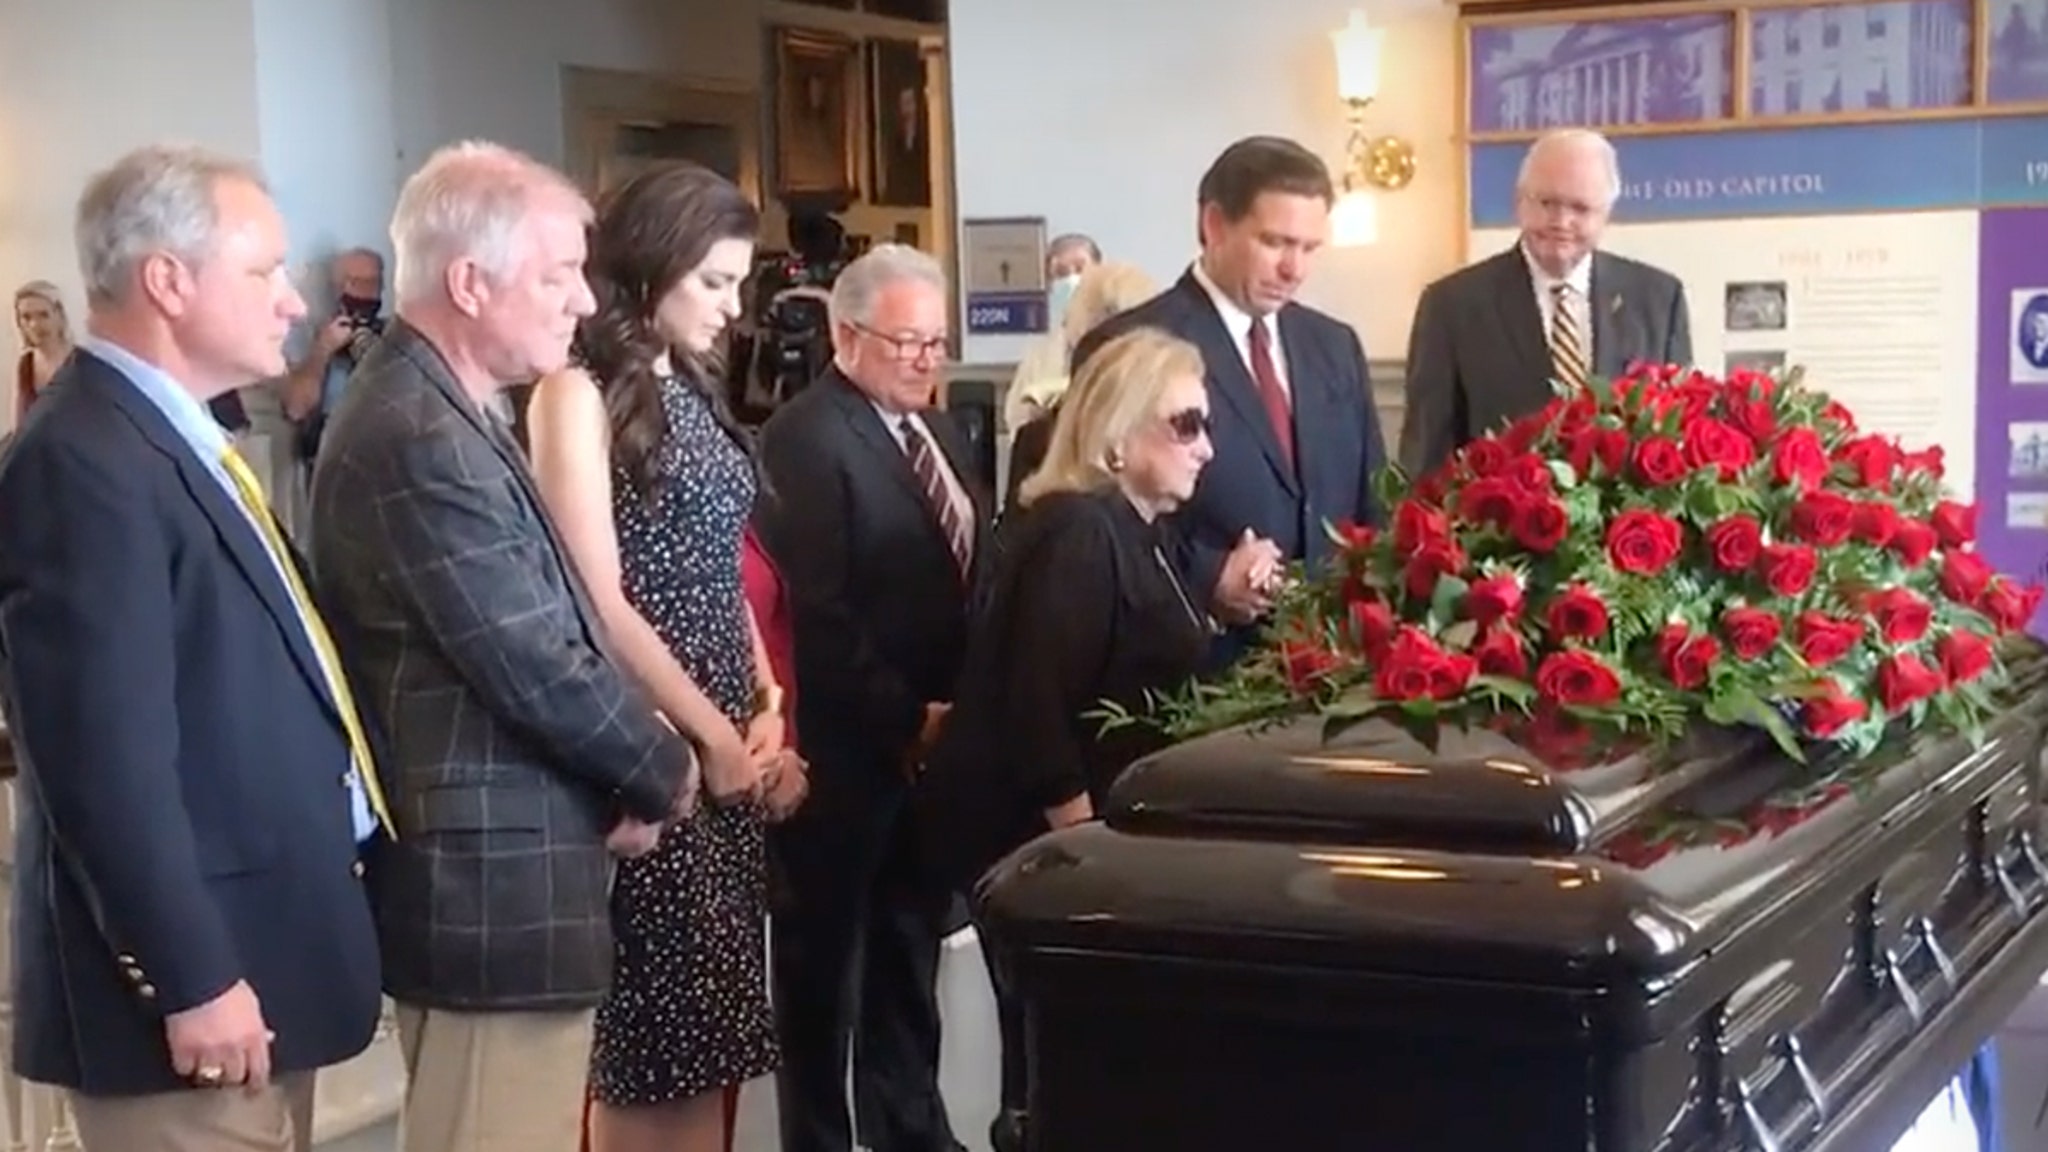 Florida State Legend Bobby Bowden's Memorial Services Begin At Florida State Capitol